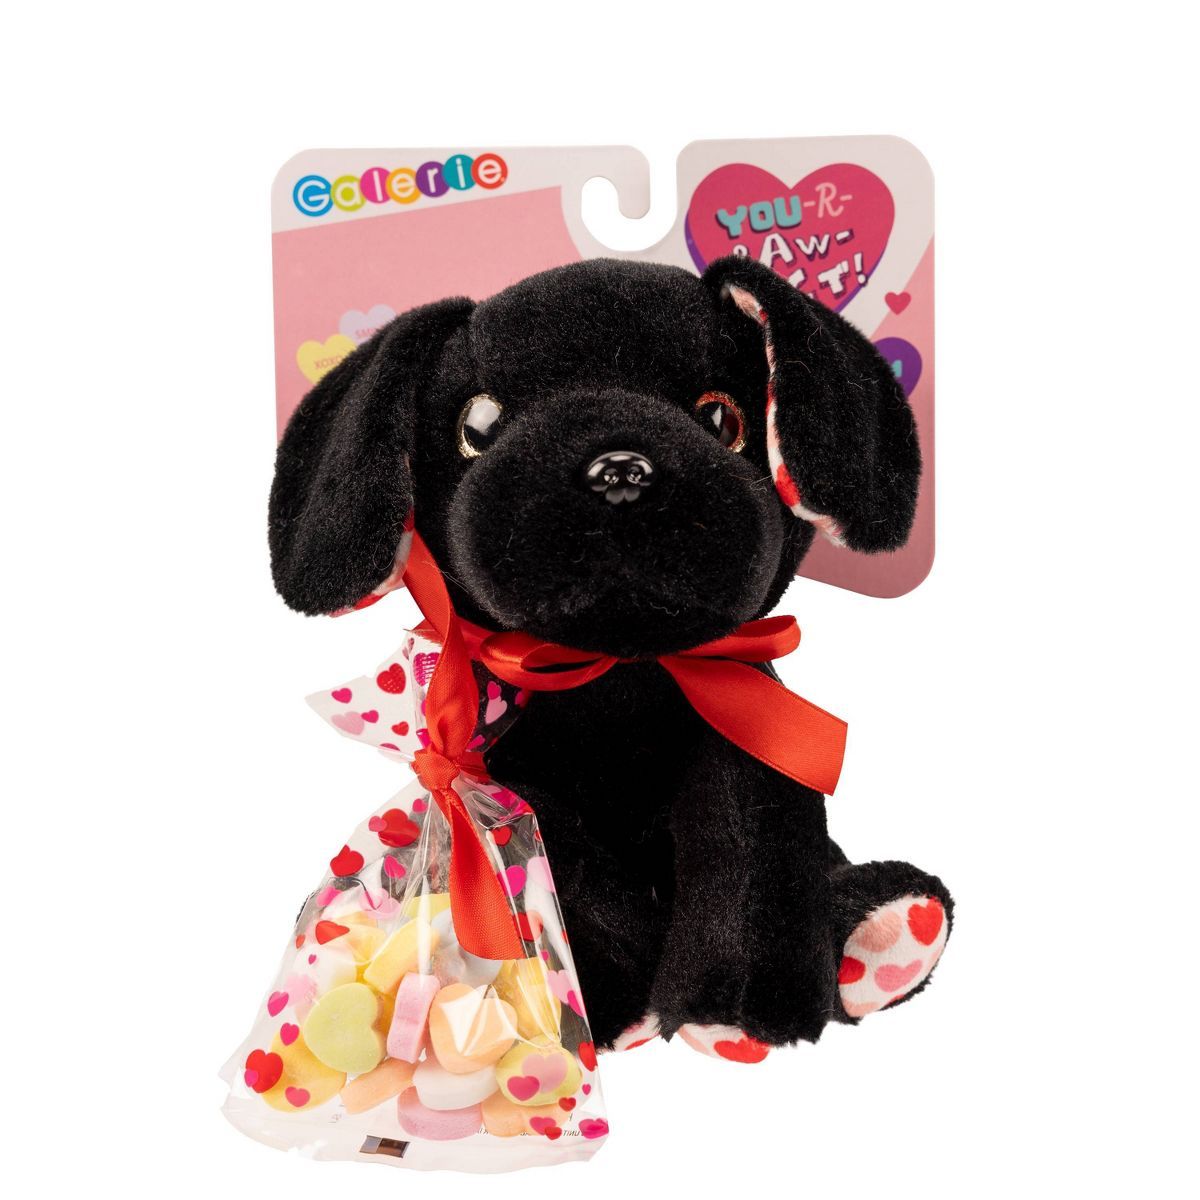 Galerie Valentine's Lab Dog Plush with Candy - 0.93oz | Target